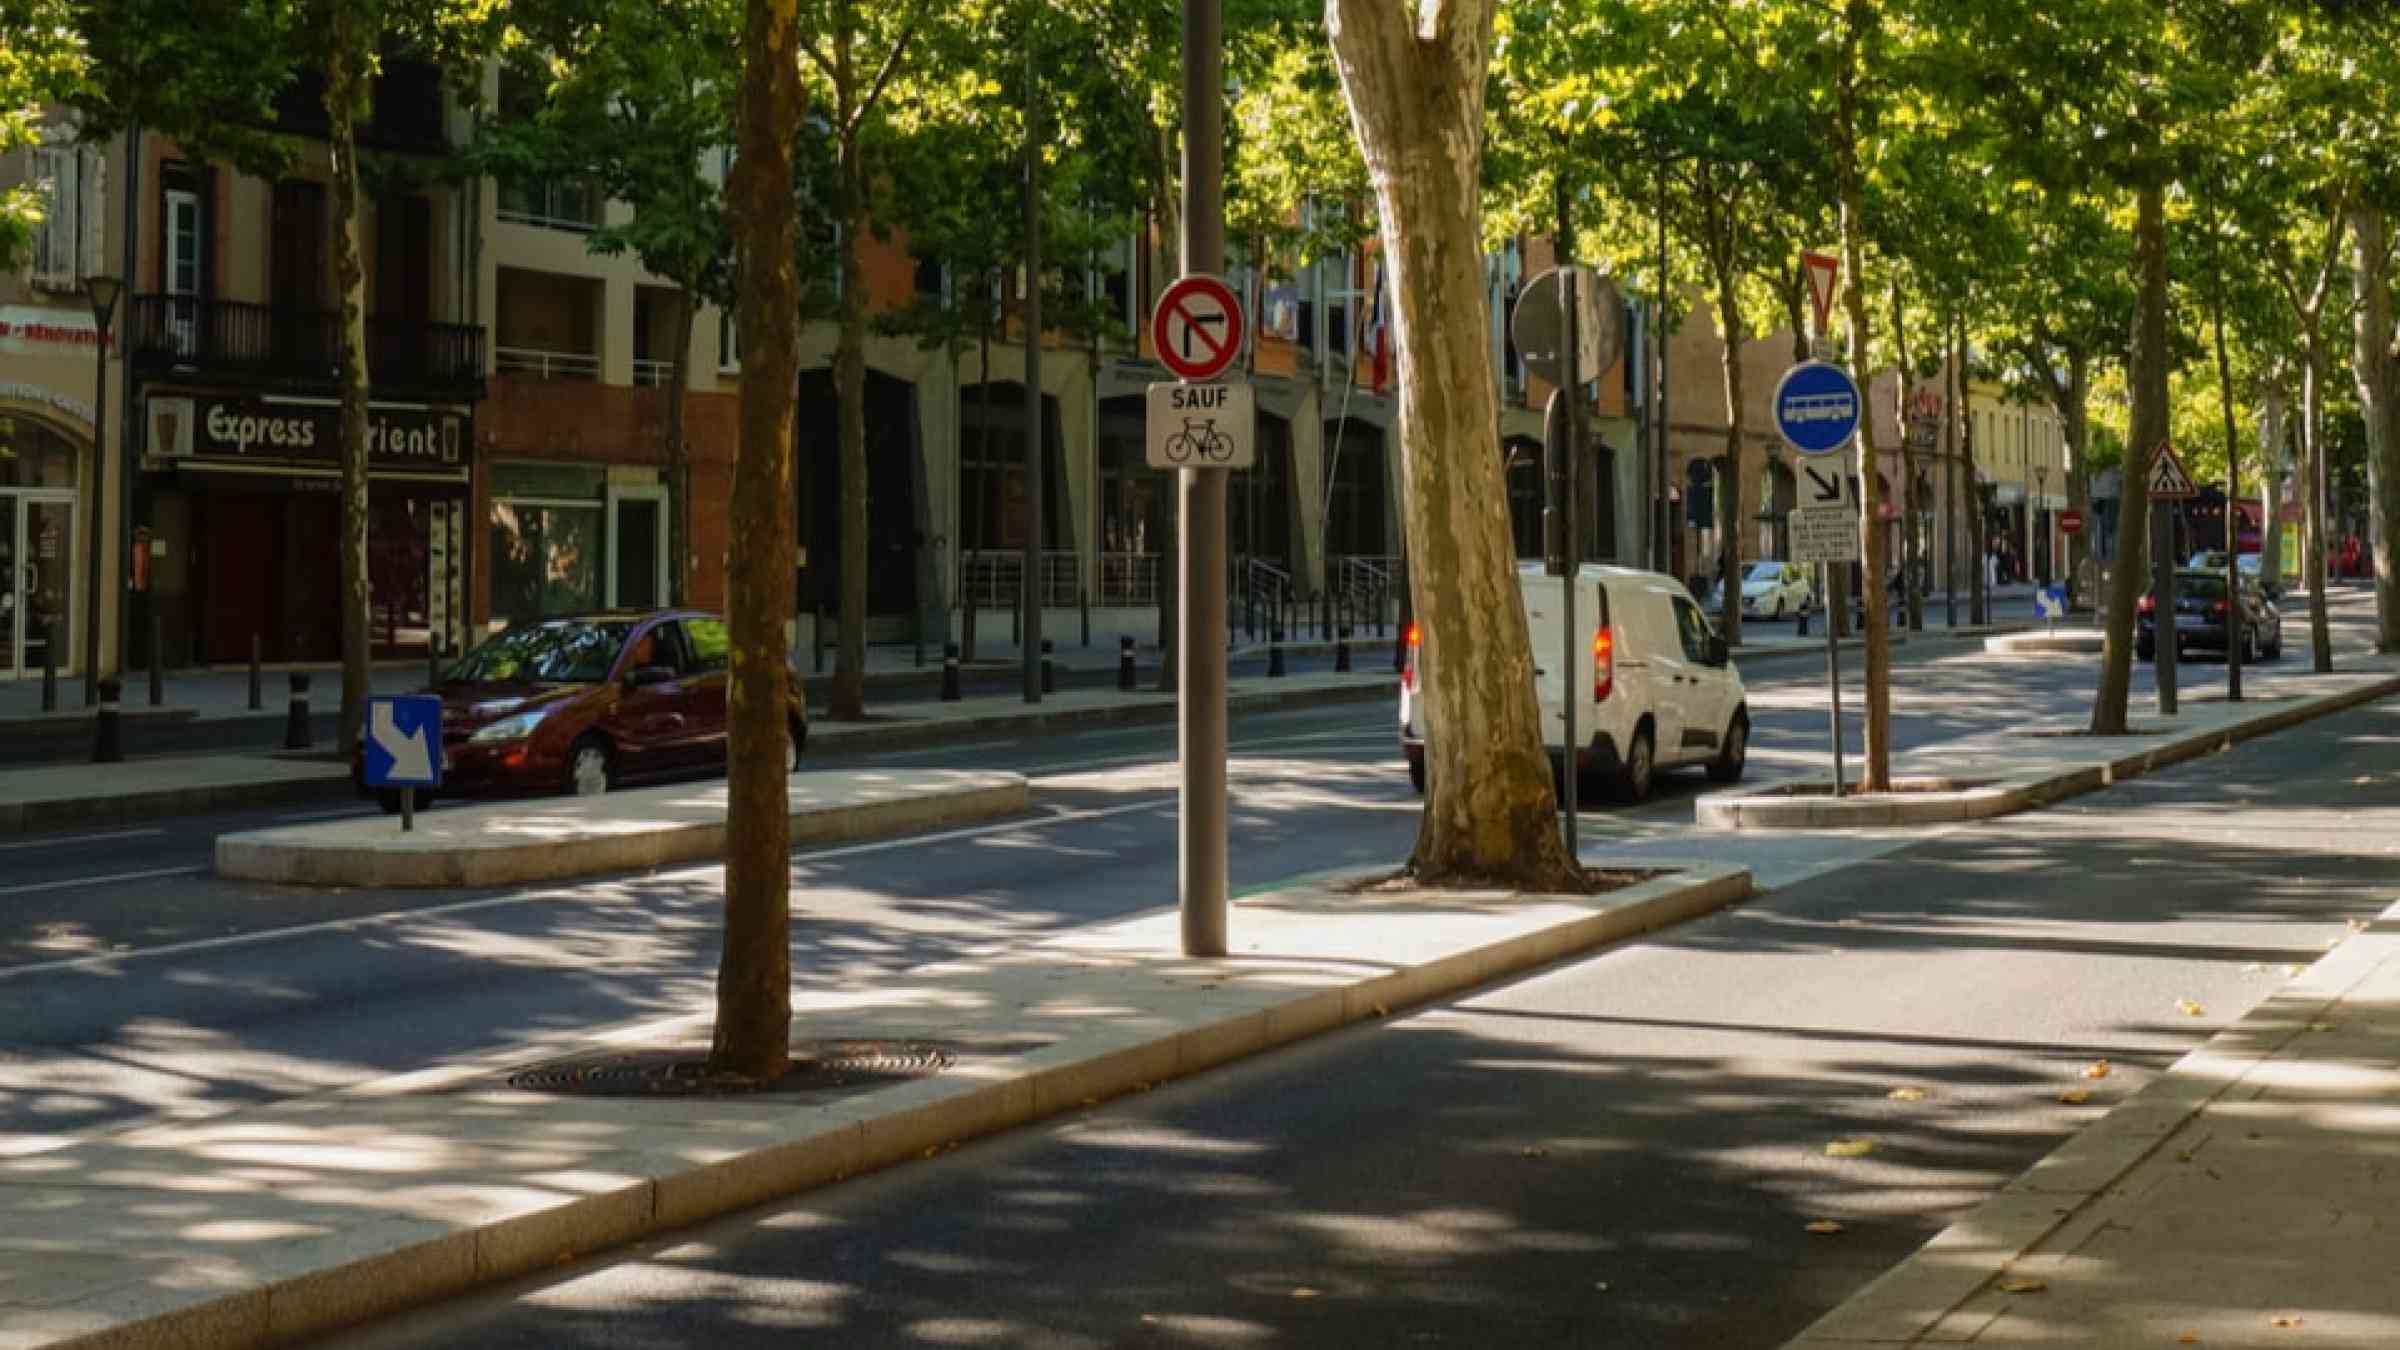 Shade produced by trees in a city street in southern France